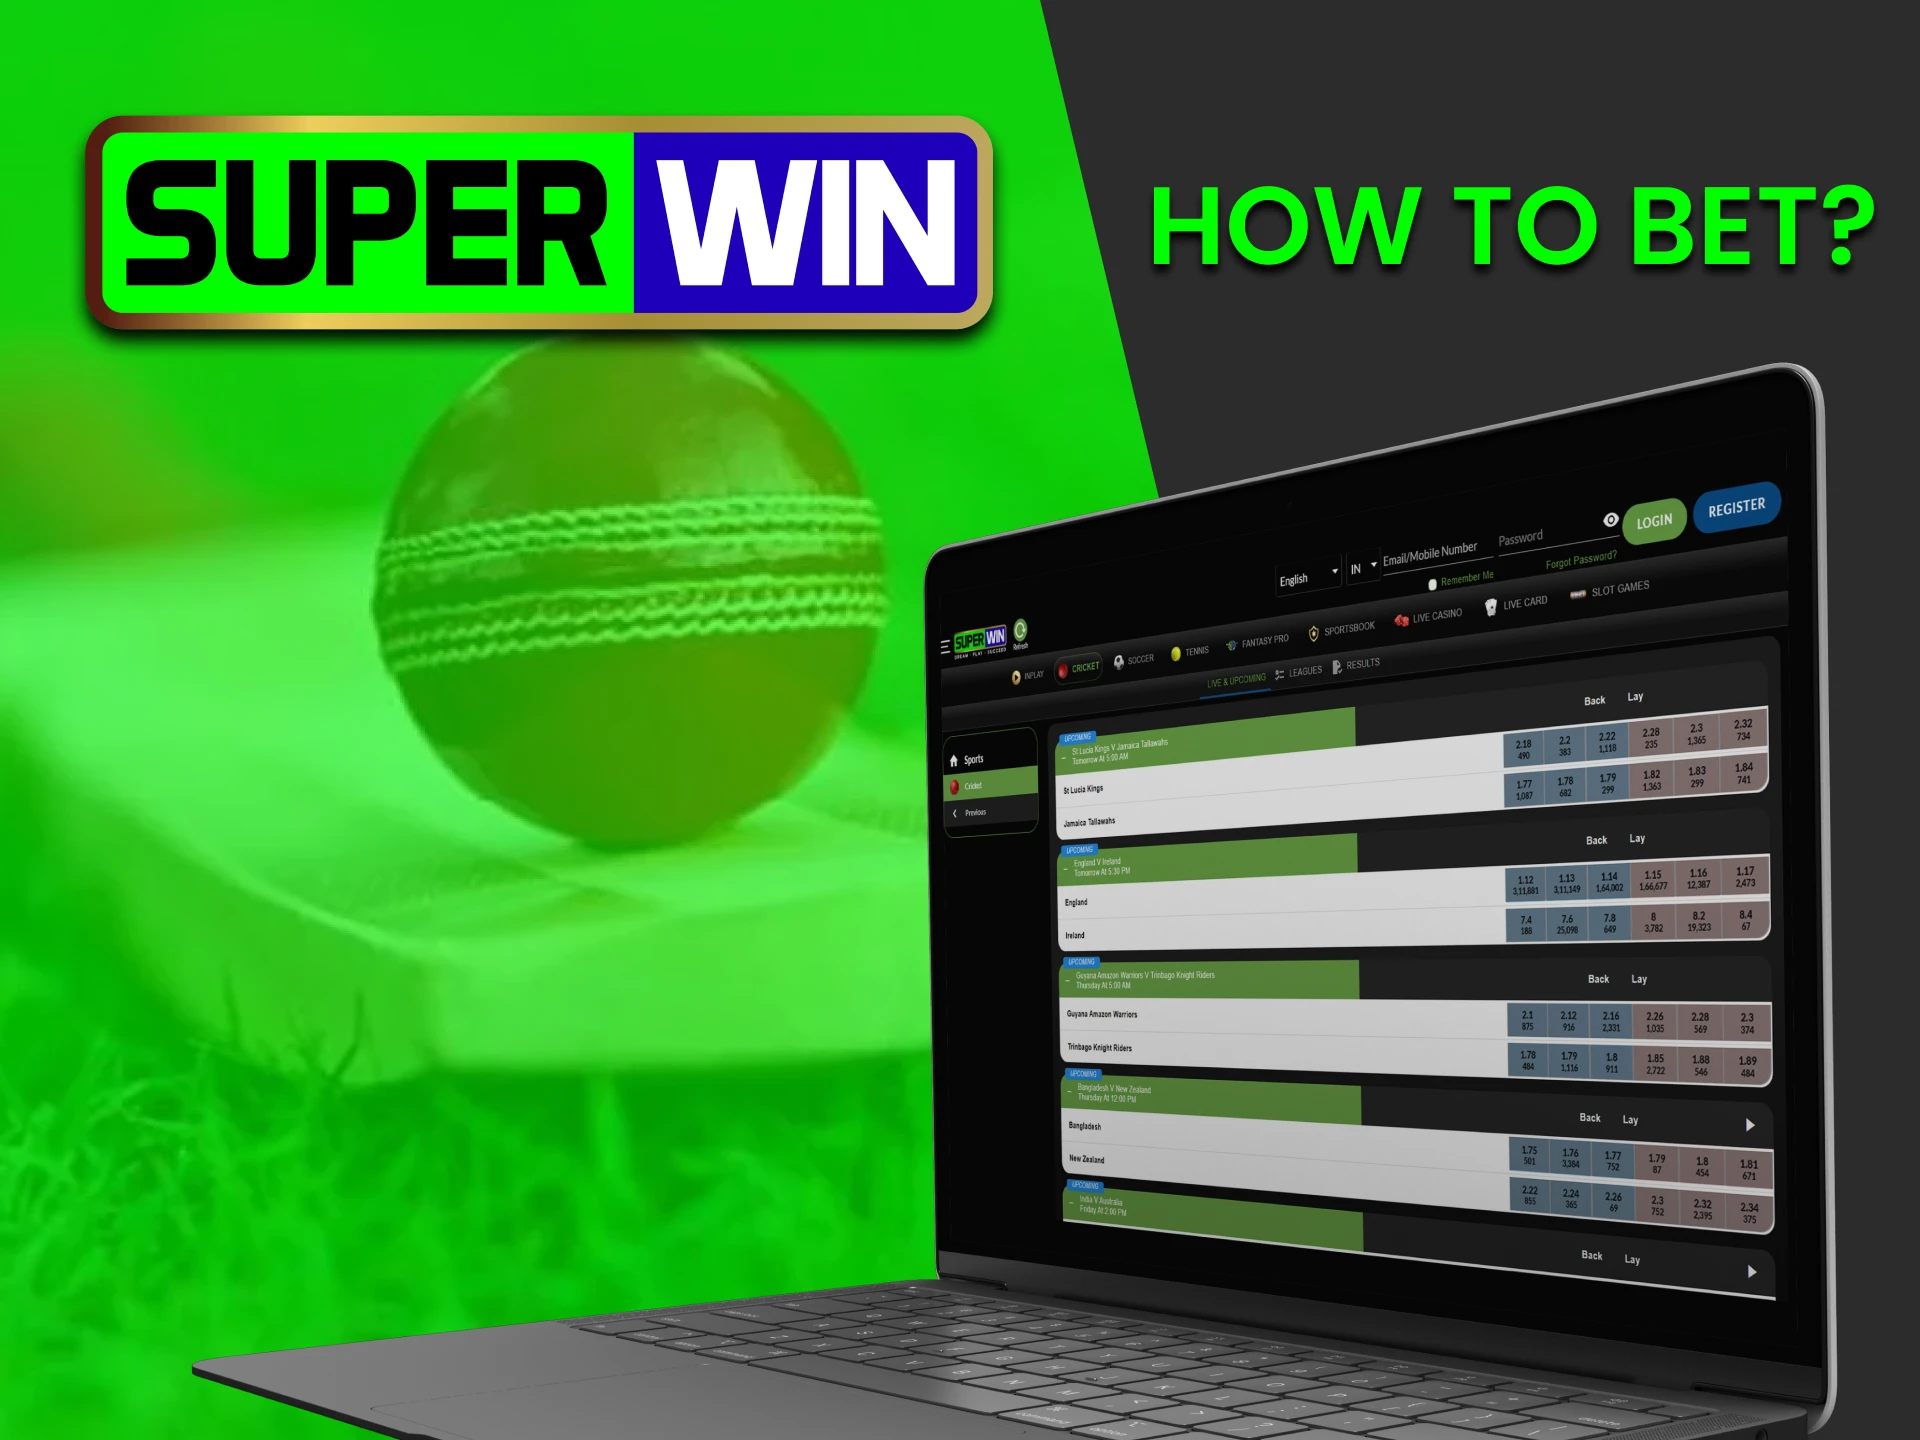 We will tell you how to start betting on cricket on the Superwin service.